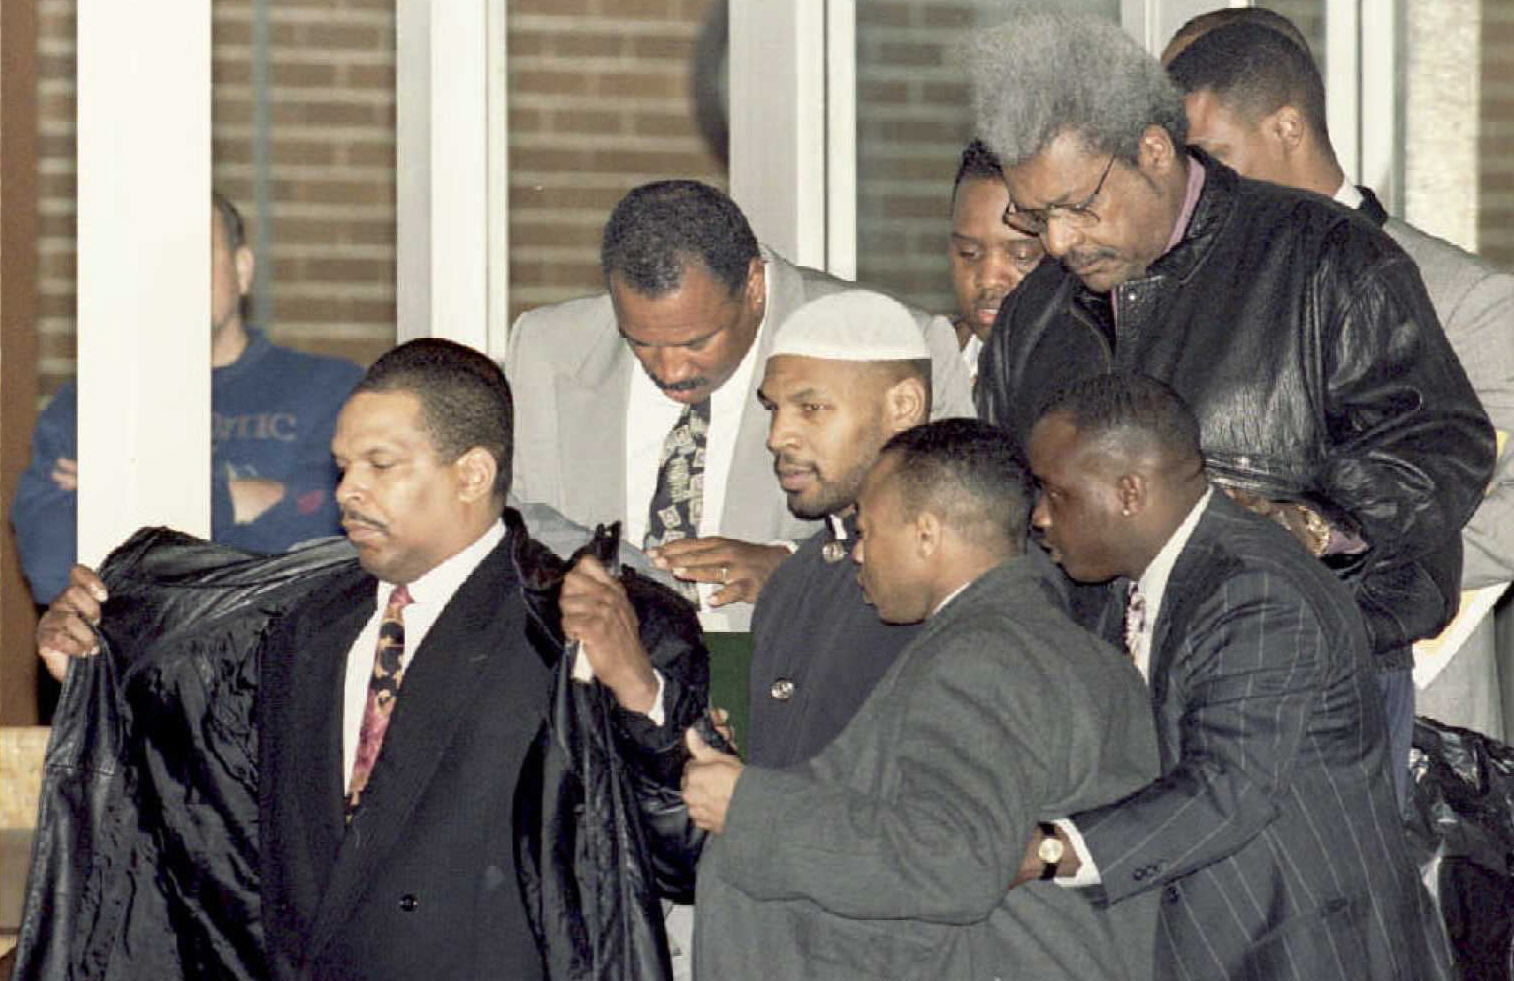 Mike Tyson leaving Indiana Youth Center with Don King after being released from prison in March 1995